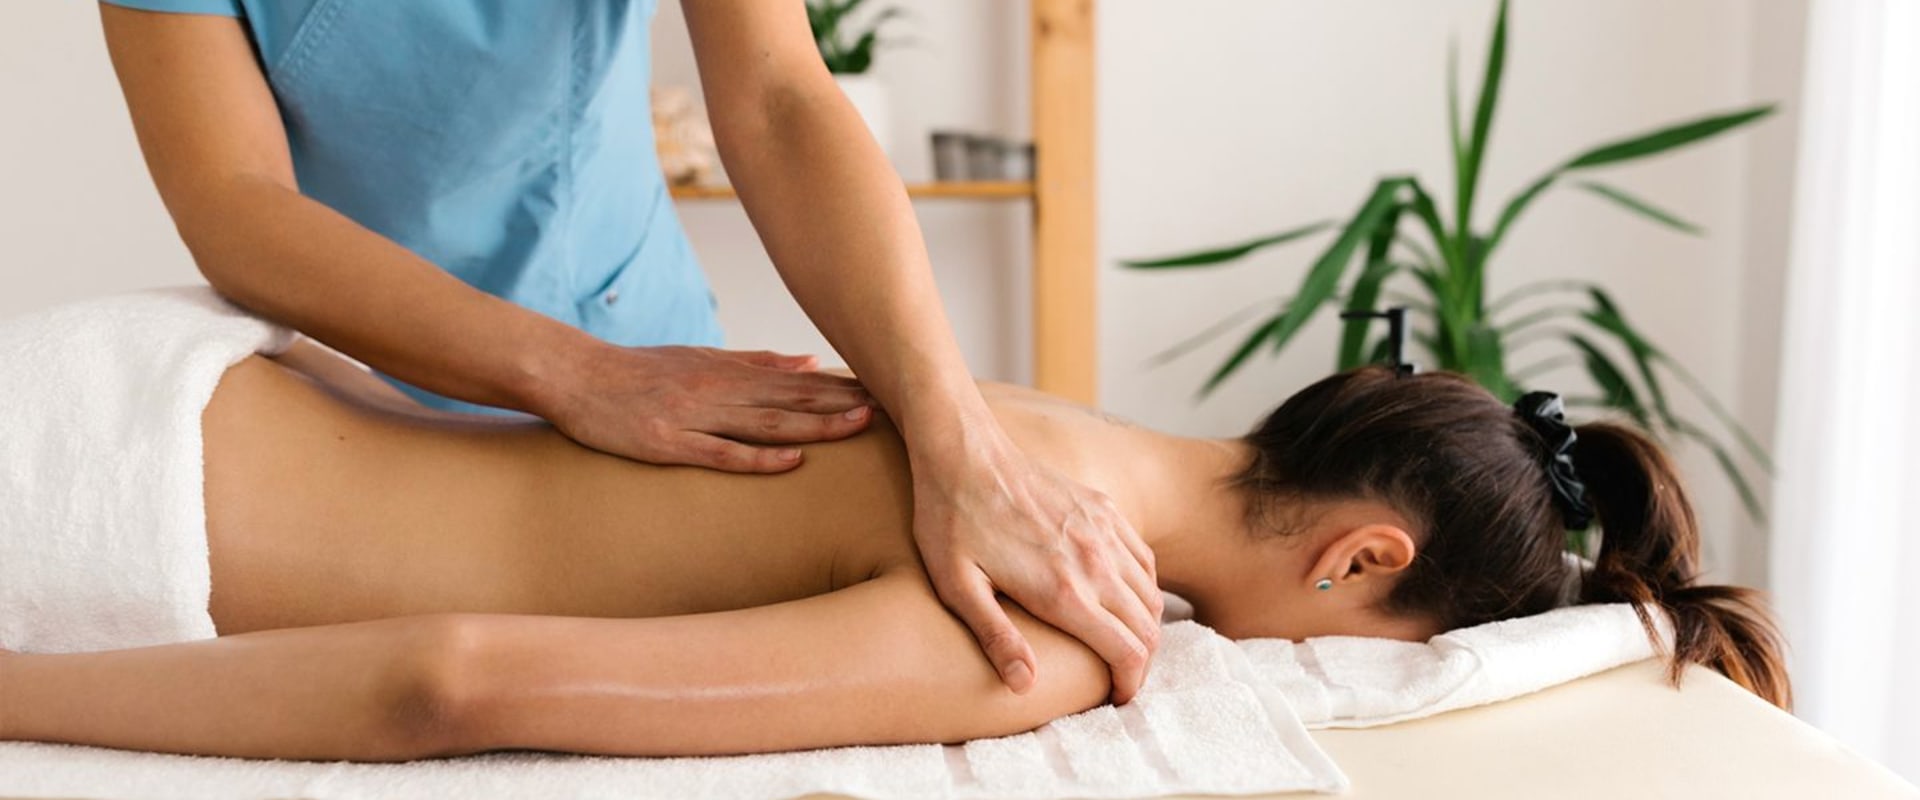 Can a massage be therapeutic?